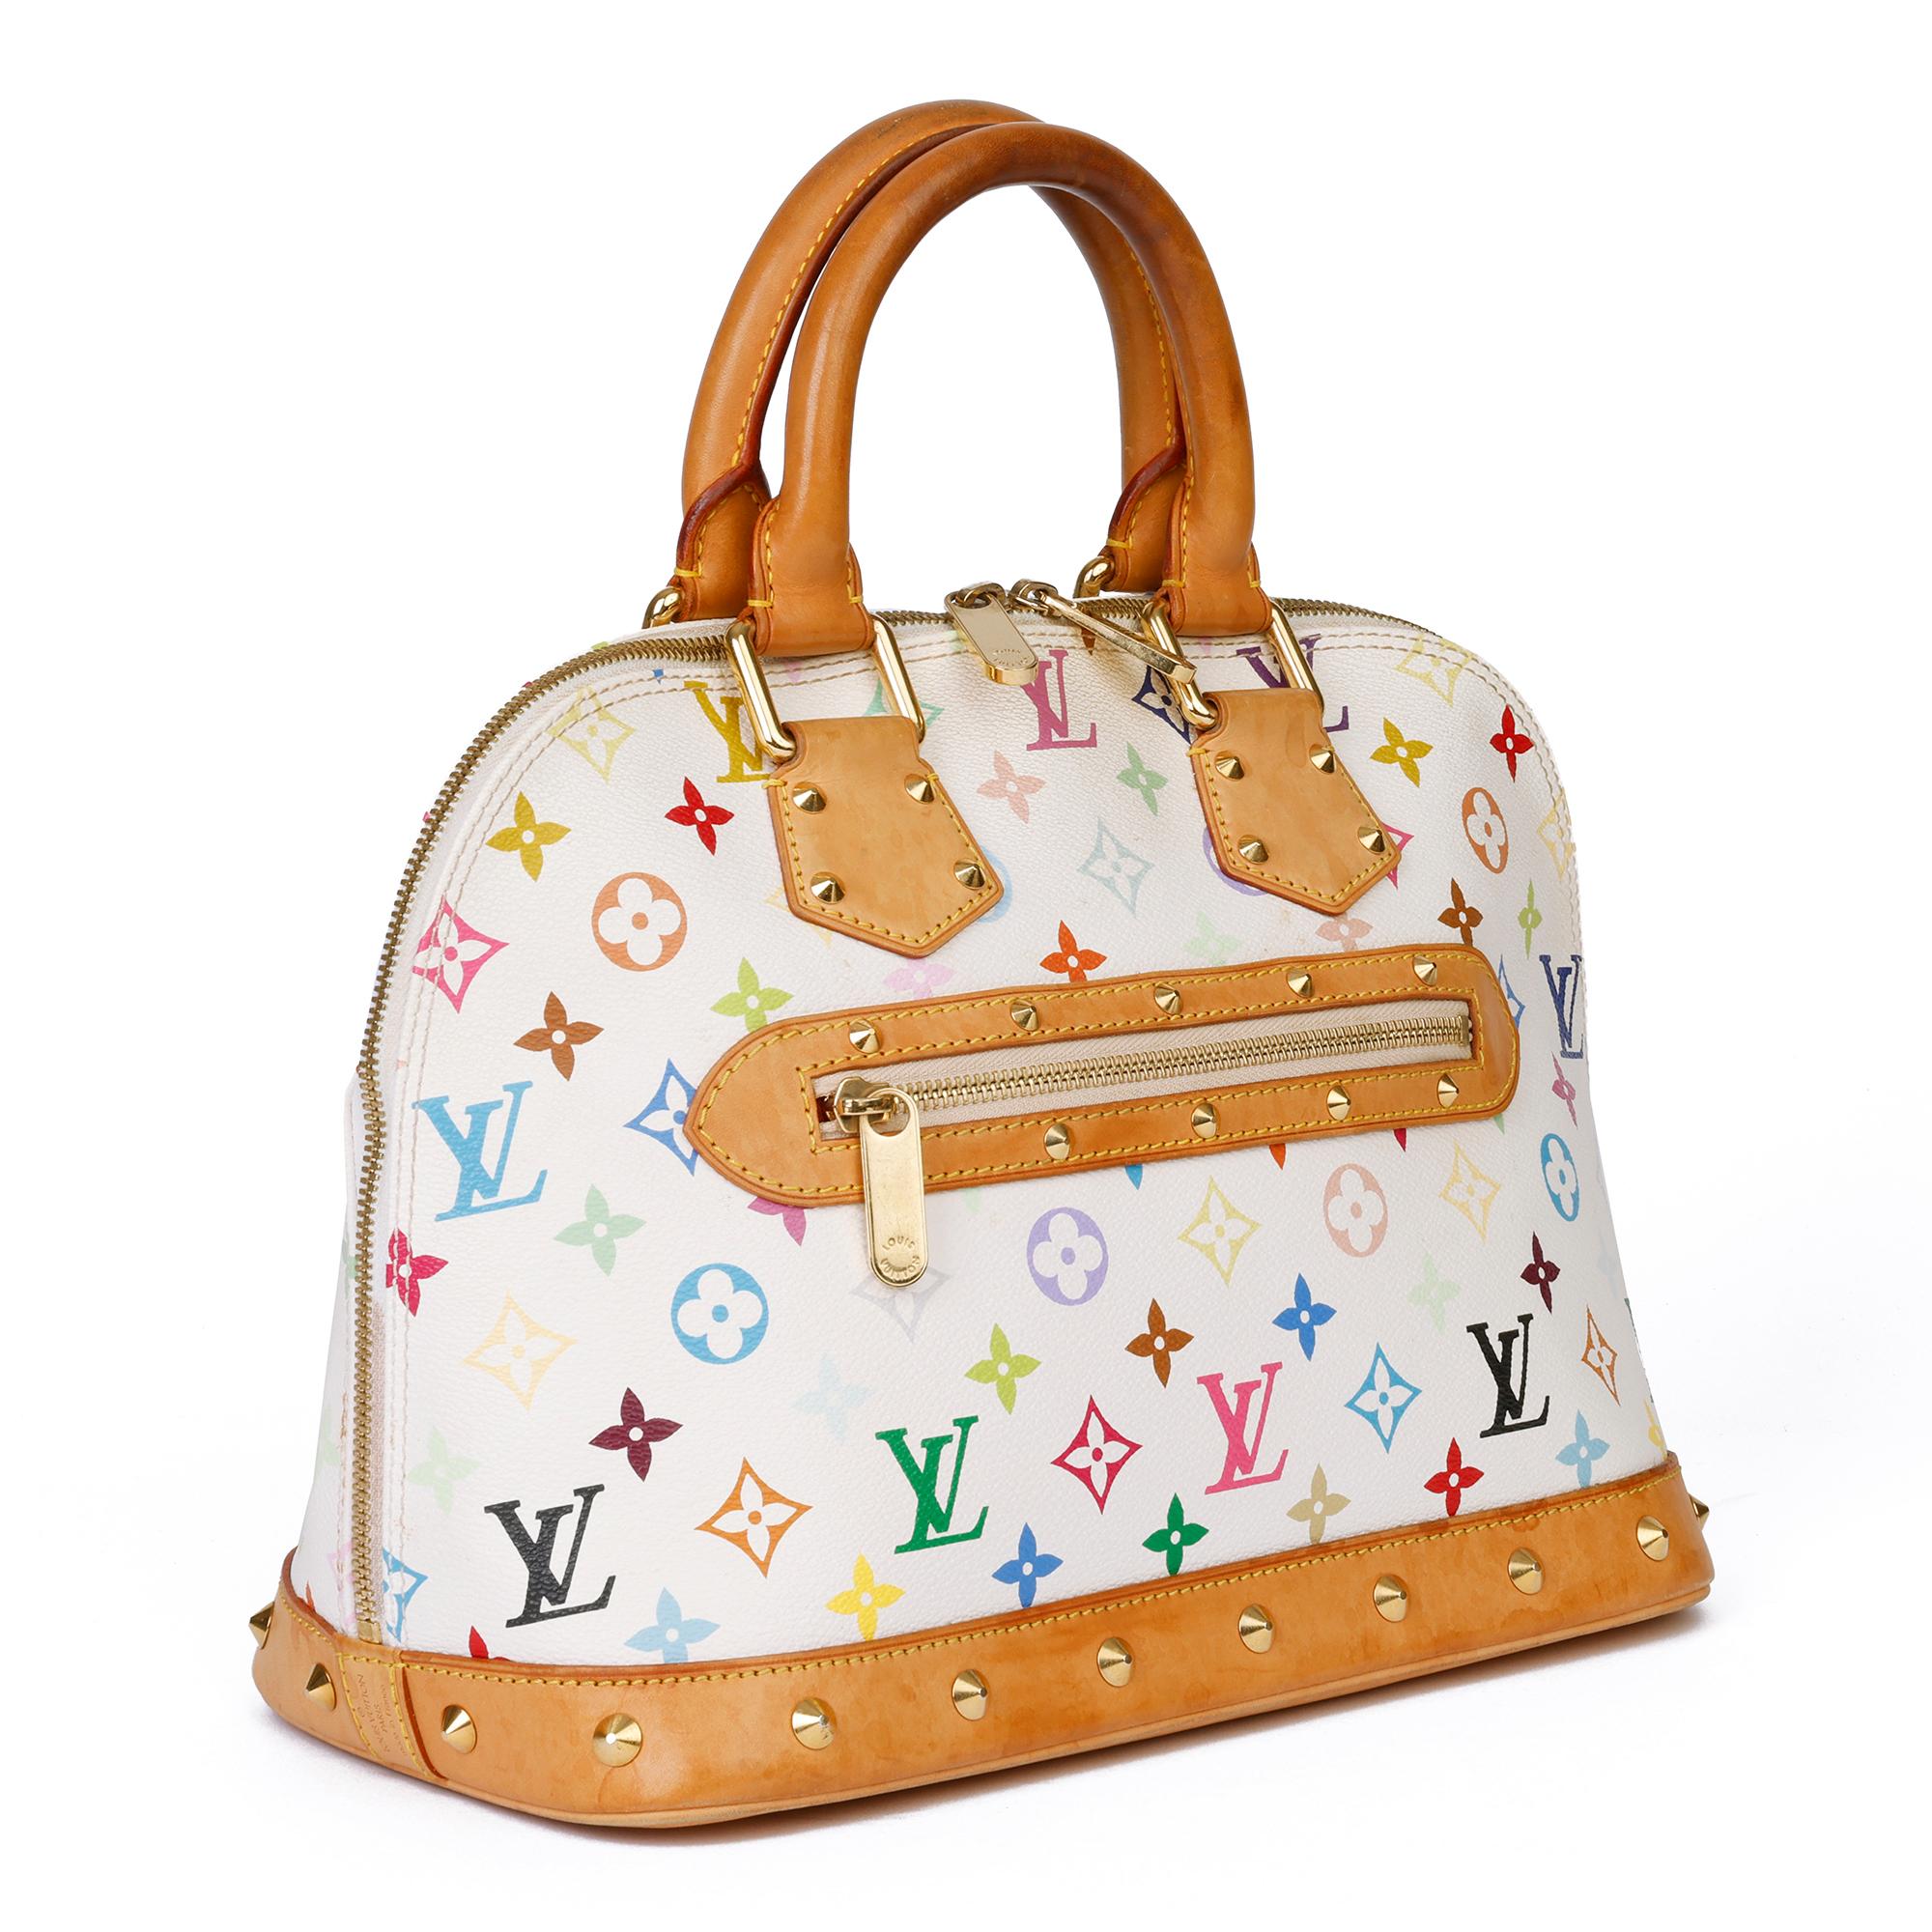 LOUIS VUITTON
White Multicolore Monogram Coated Canvas & Vachetta Leather Murakami Alma

Serial Number: FL0074
Age (Circa): 2004
Accompanied By: Louis Vuitton Dust Bag, Care Booklet, Invoice
Authenticity Details: Date Stamp (Made in France) 
Gender: